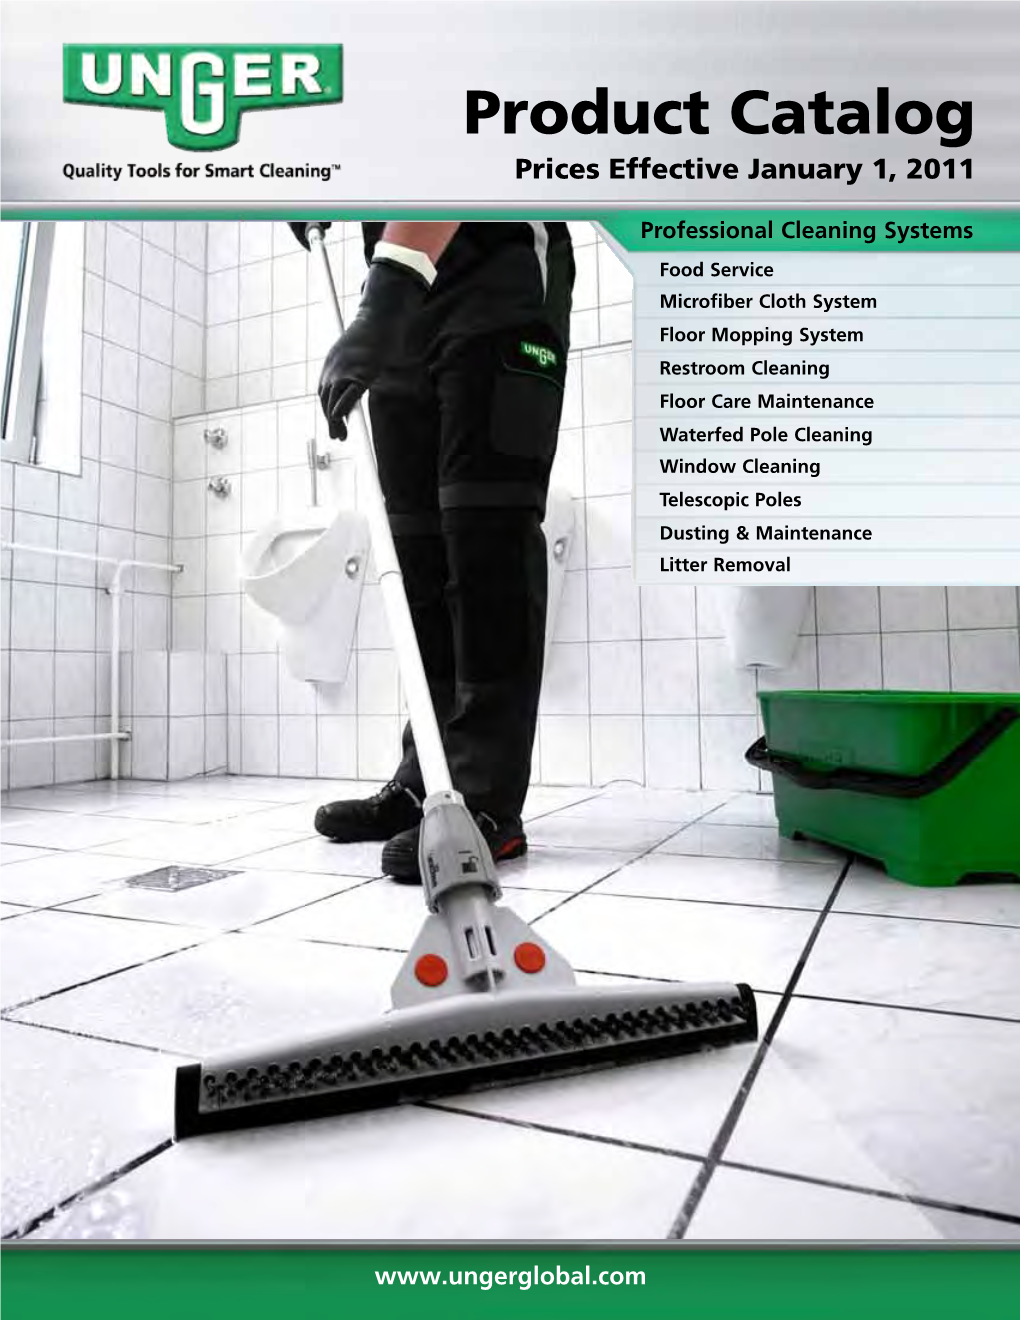 Product Catalog Prices Effective January 1, 2011